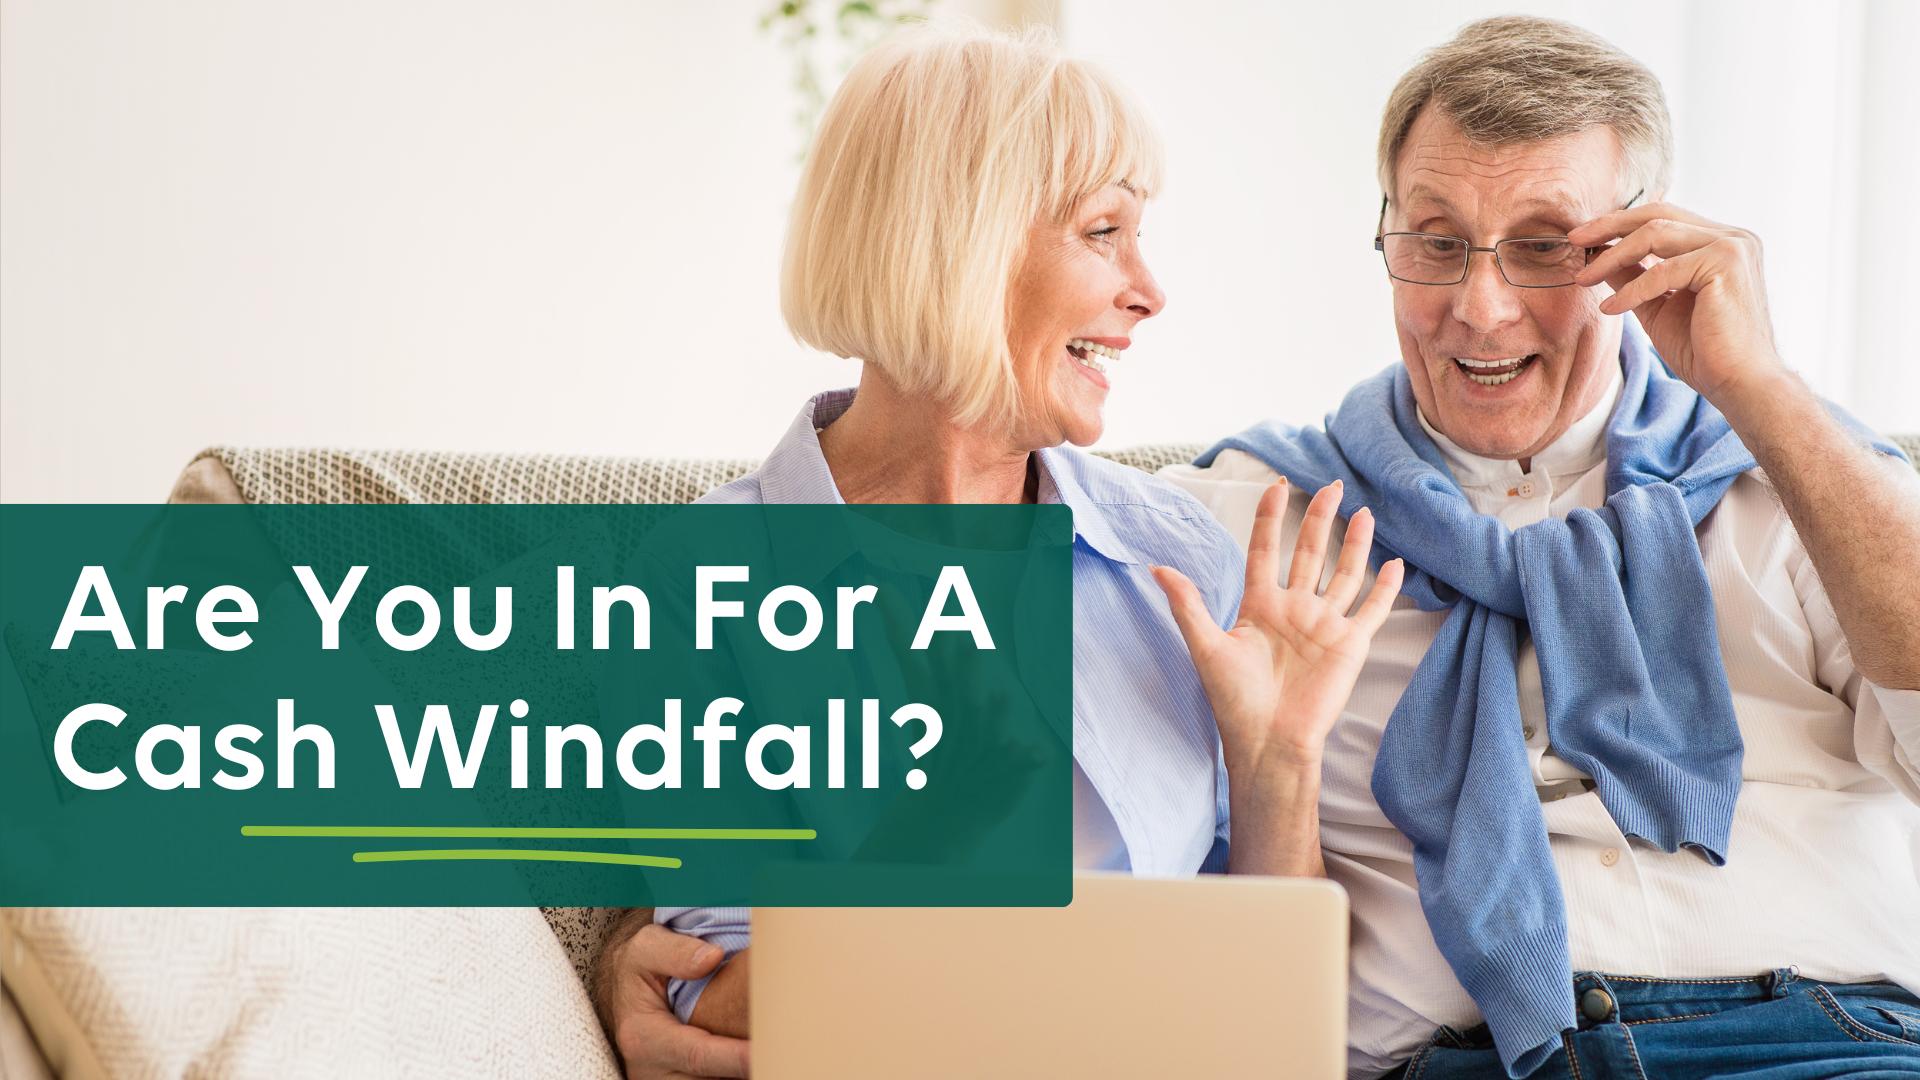 Are You In For A Cash Windfall?